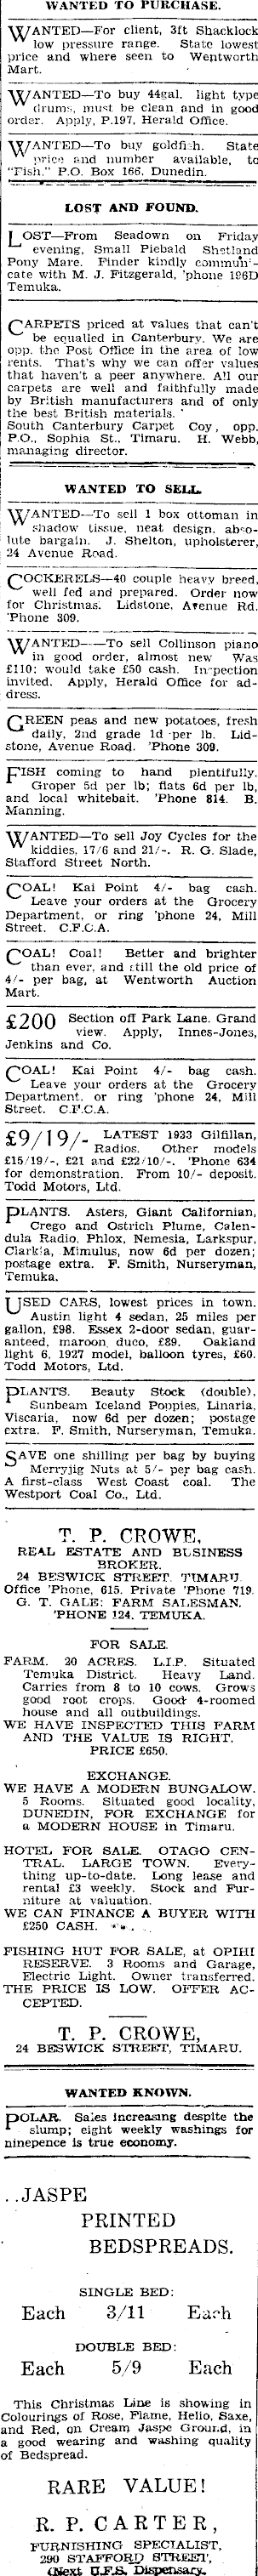 Papers Past | Newspapers | Timaru | 30 November 1932 | Page 13 Advertisements Column 4